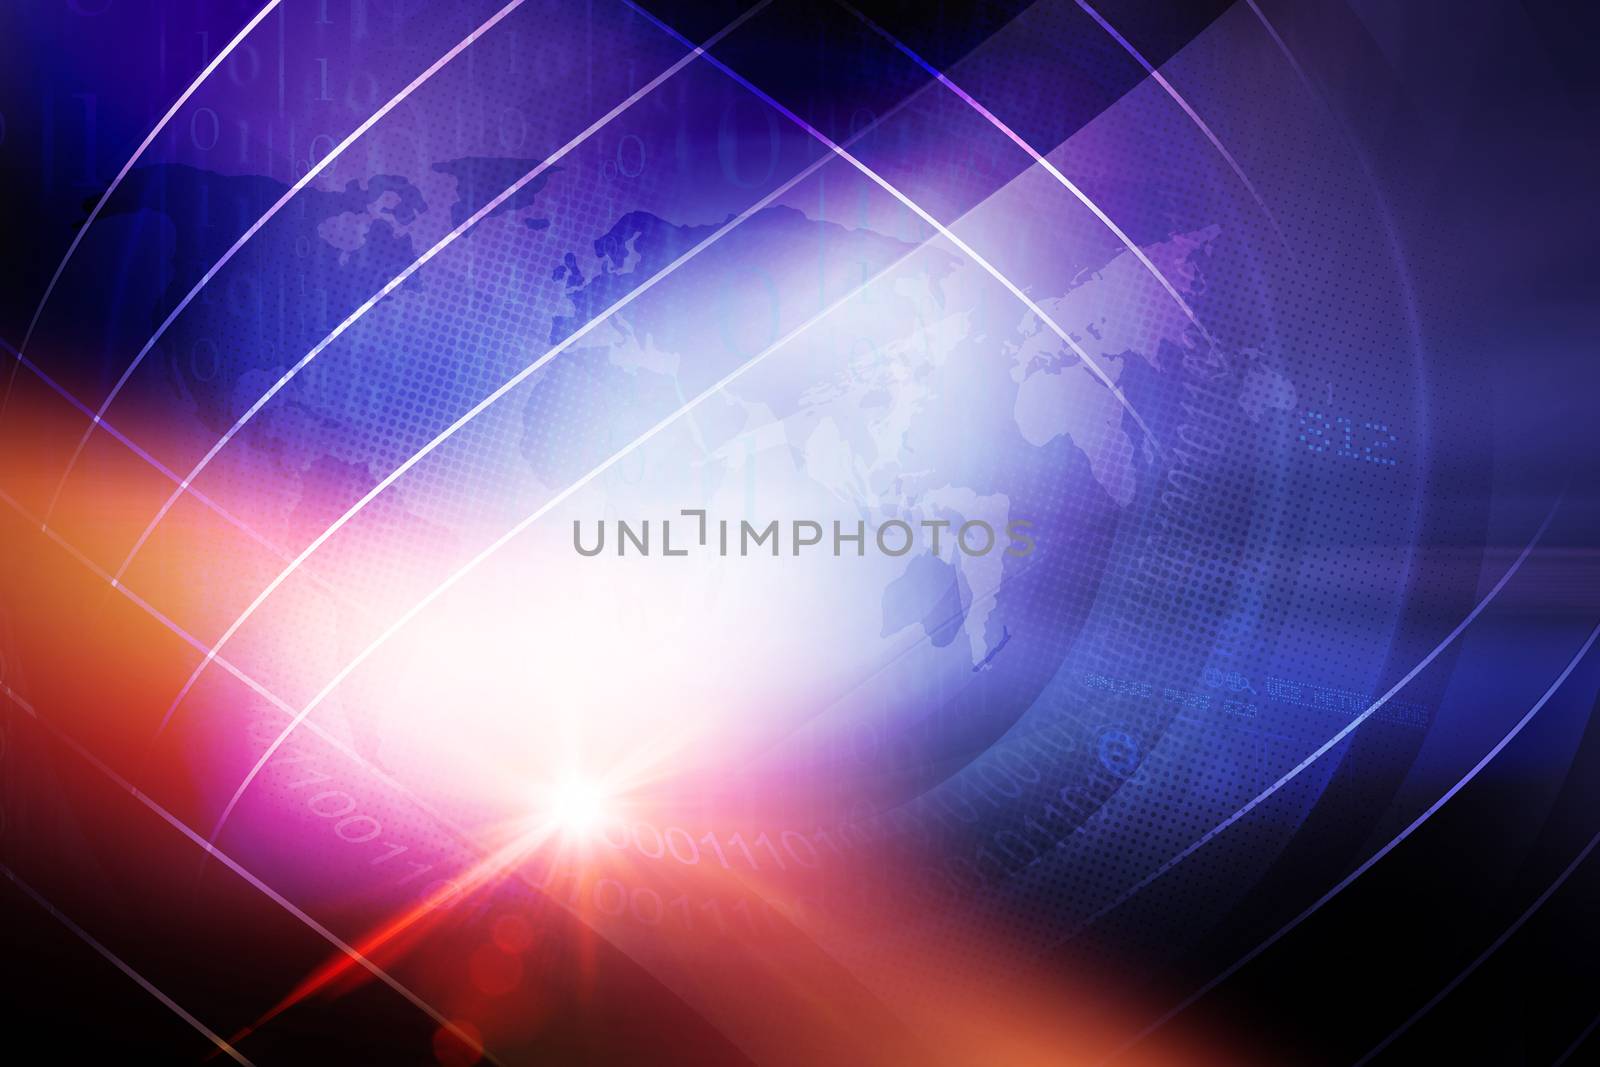 Abstract Digital World News Background with Lens Effect. 3d Illustration, 3d Render